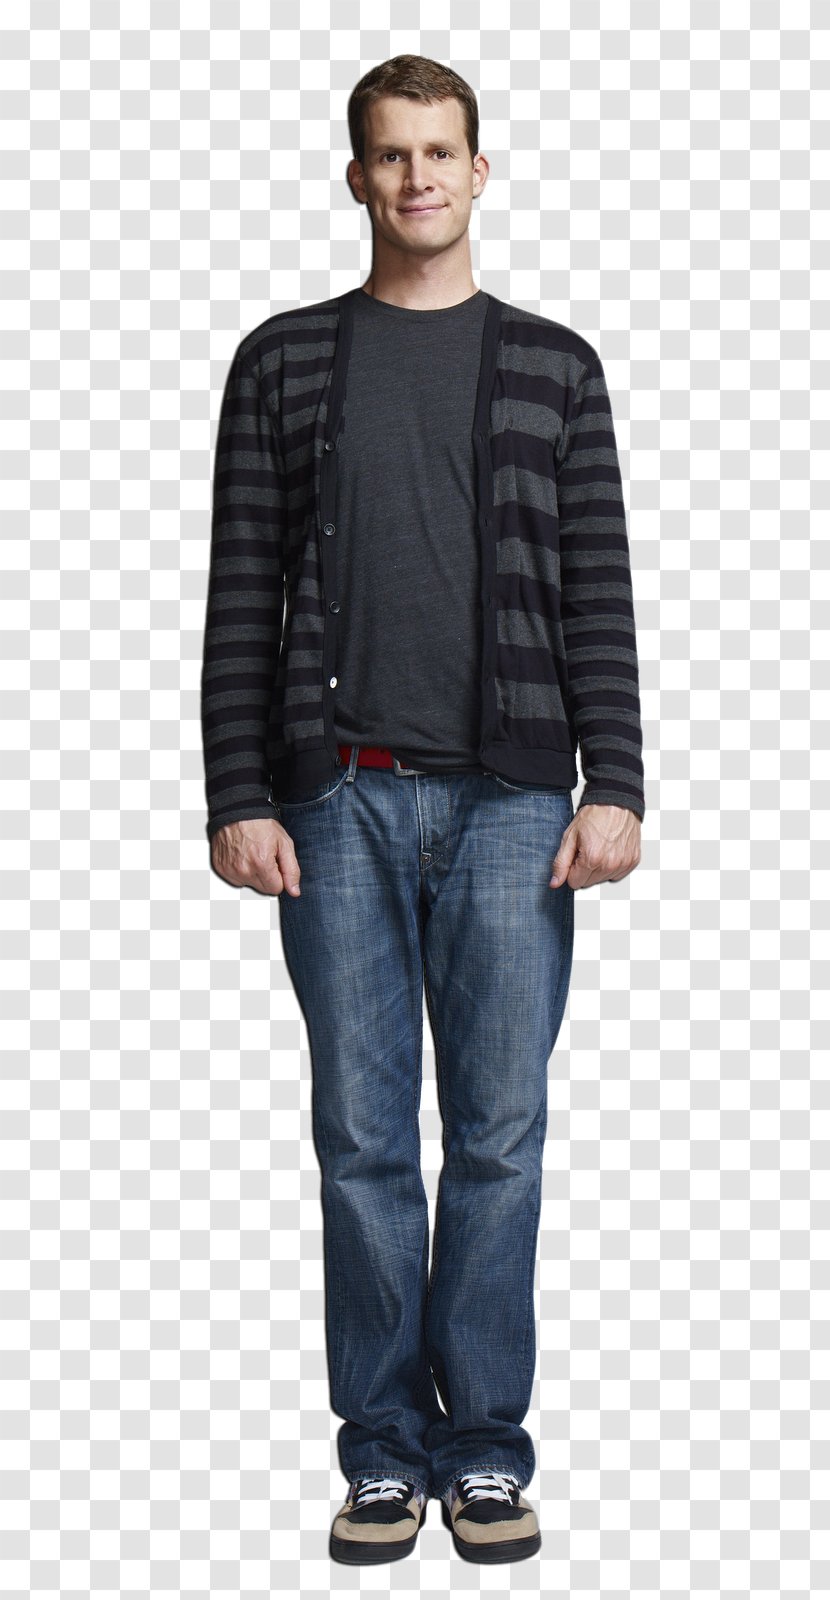 Daniel Tosh Blazer T-shirt Jacket Clothing - Trousers - Stand Up Comedy Transparent PNG